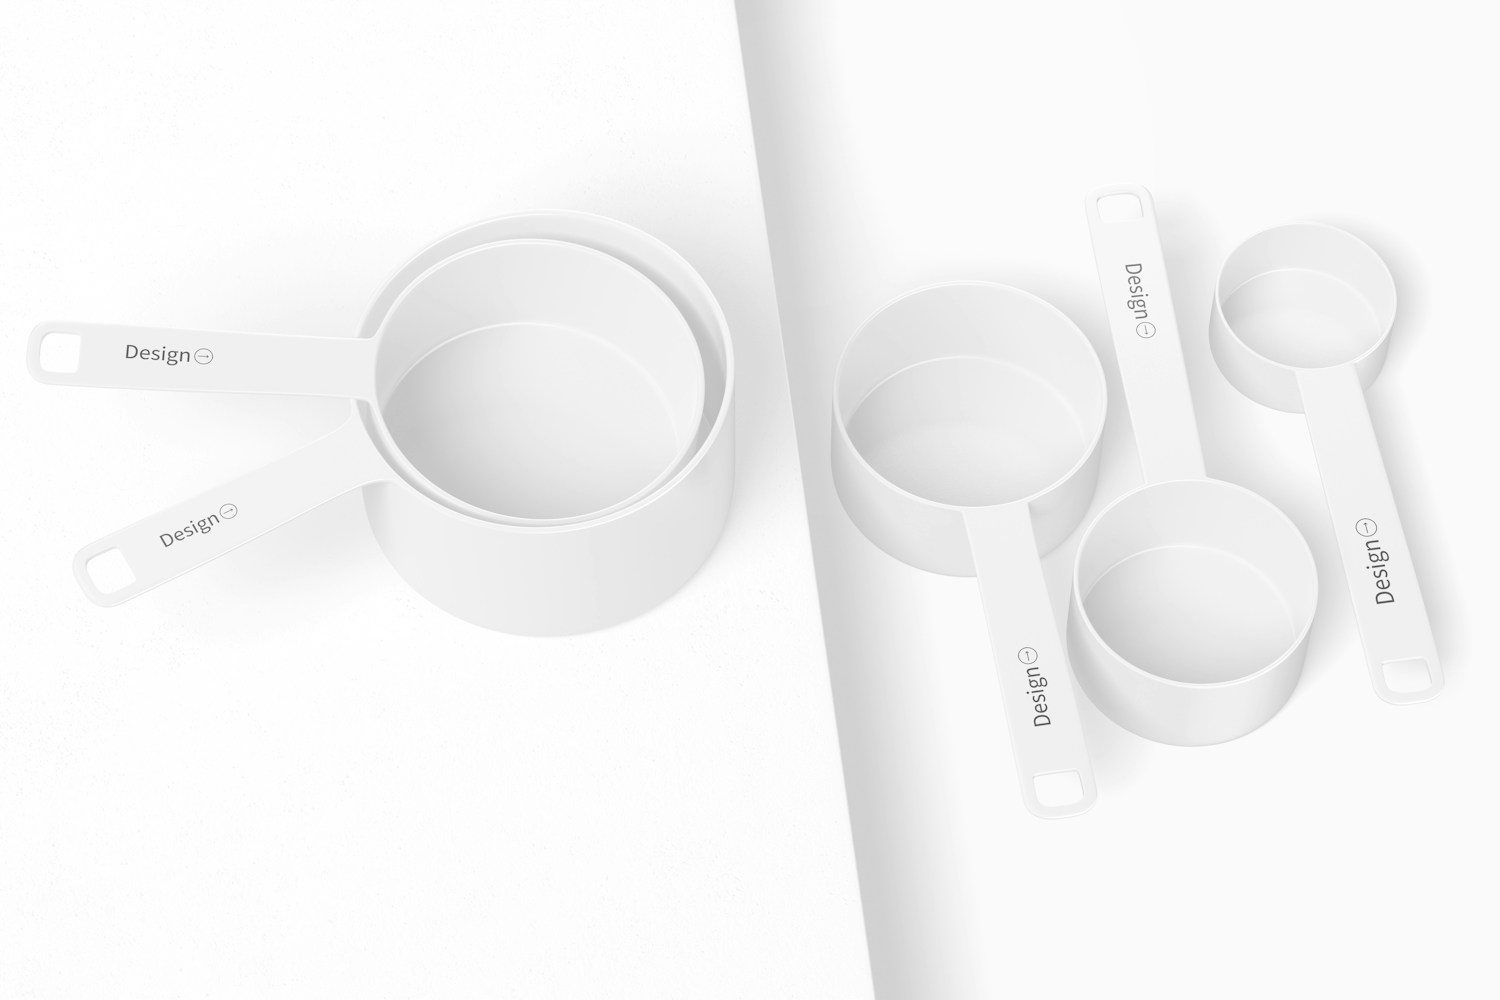 Measuring Cups Set Mockup, Perspective View